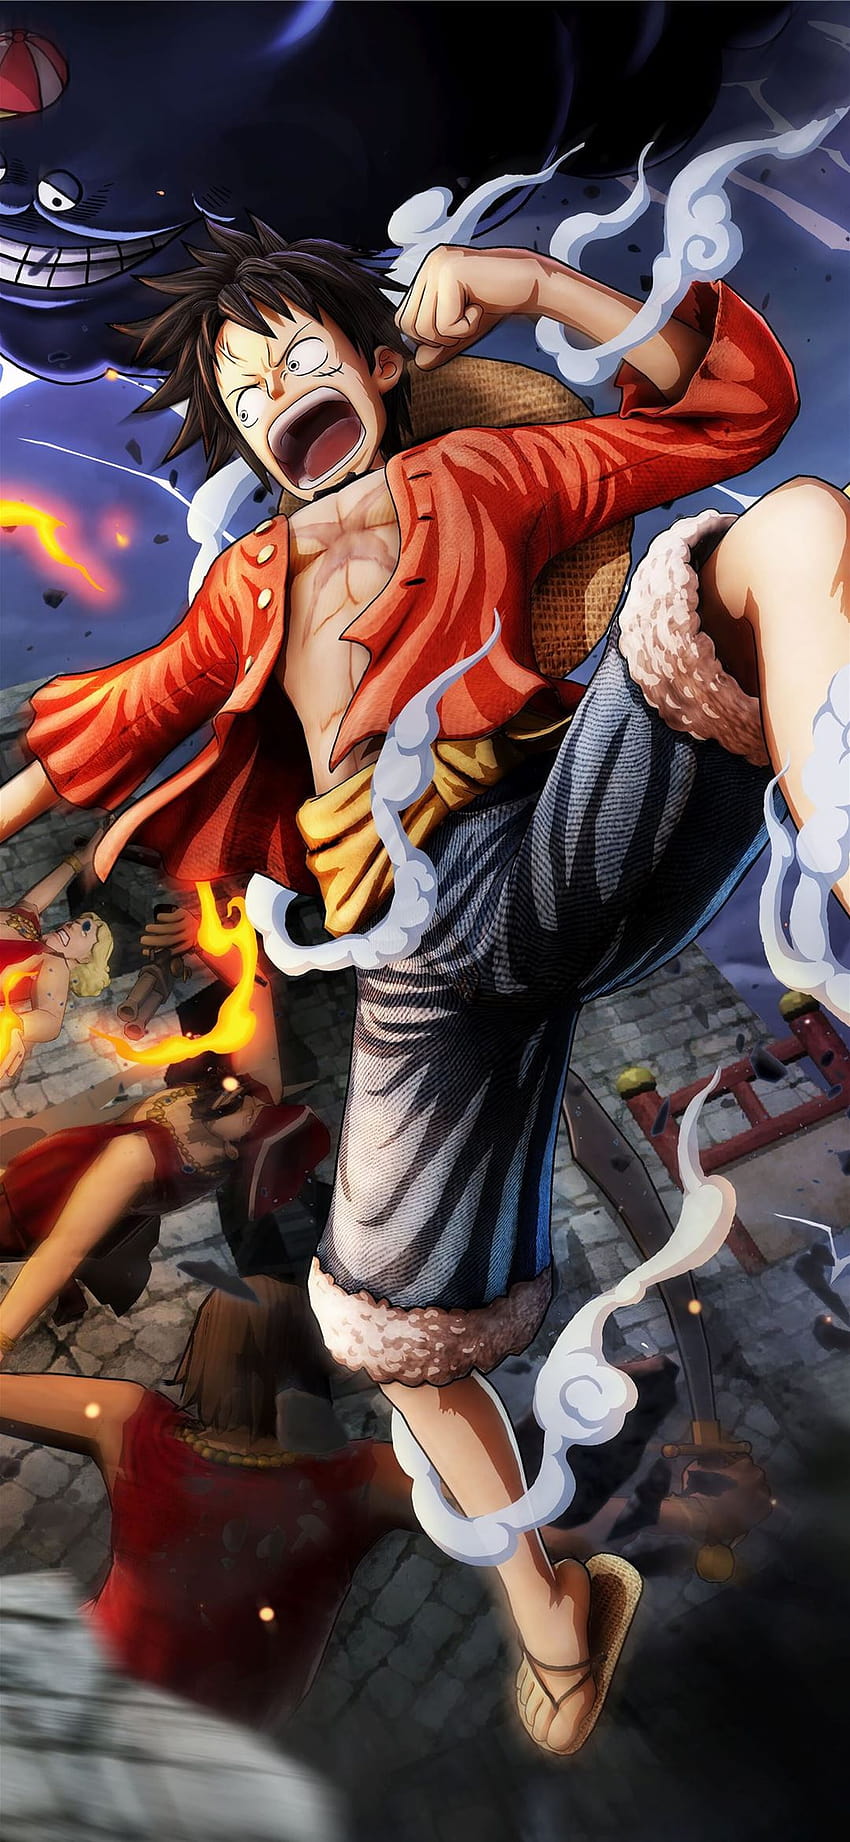 Anime One Piece KoLPaPer Awesome iPhone, ipad estetis one piece wallpaper ponsel HD